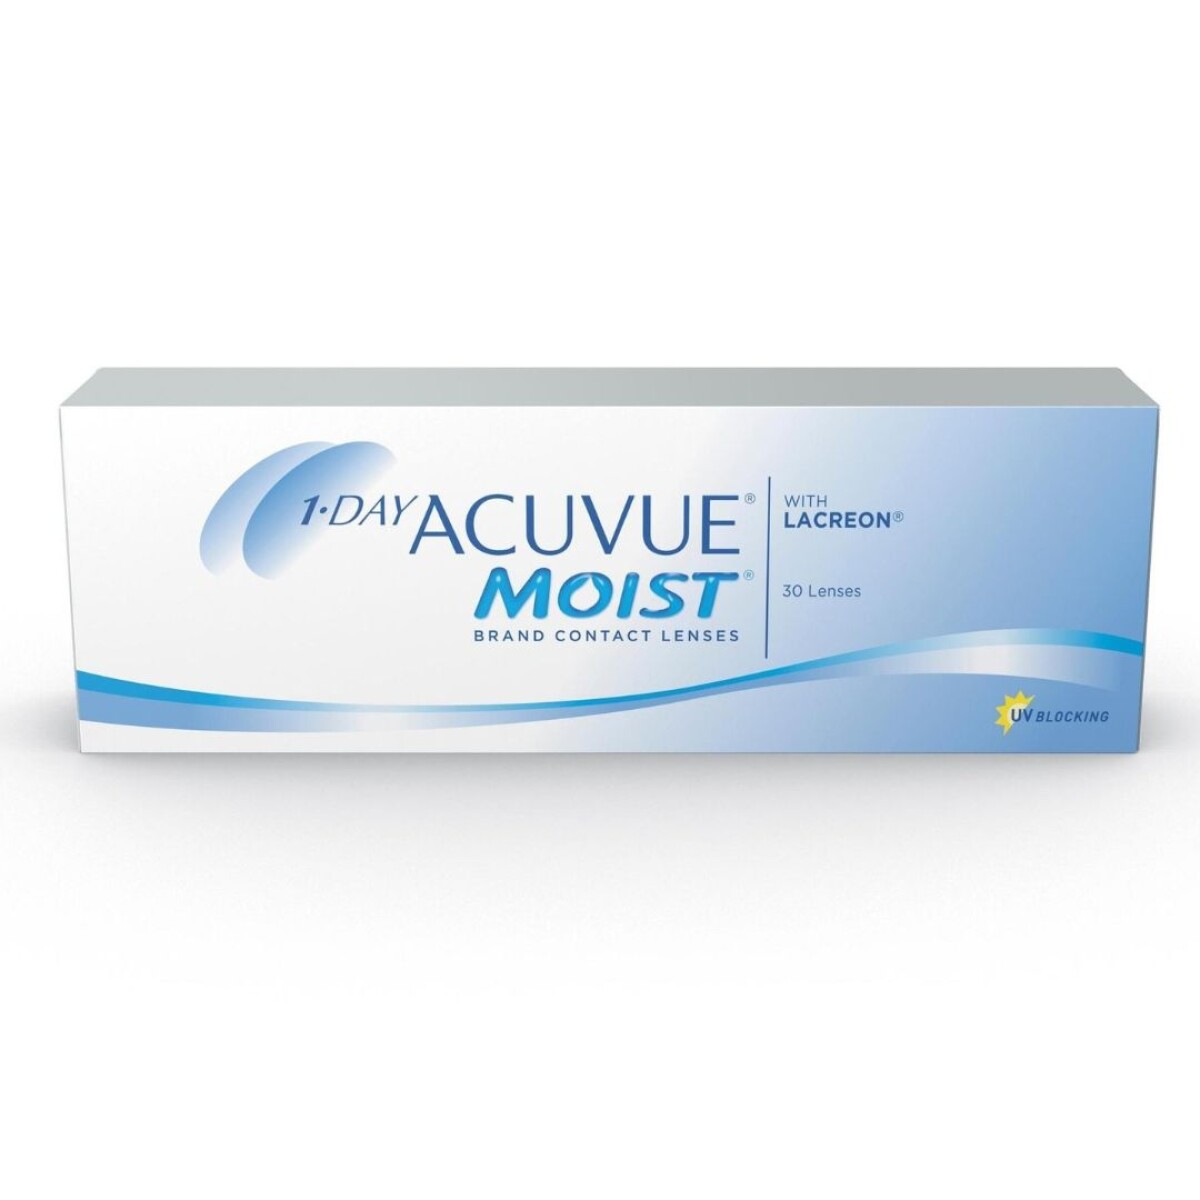 Acuvue One Day Moist +5.25 